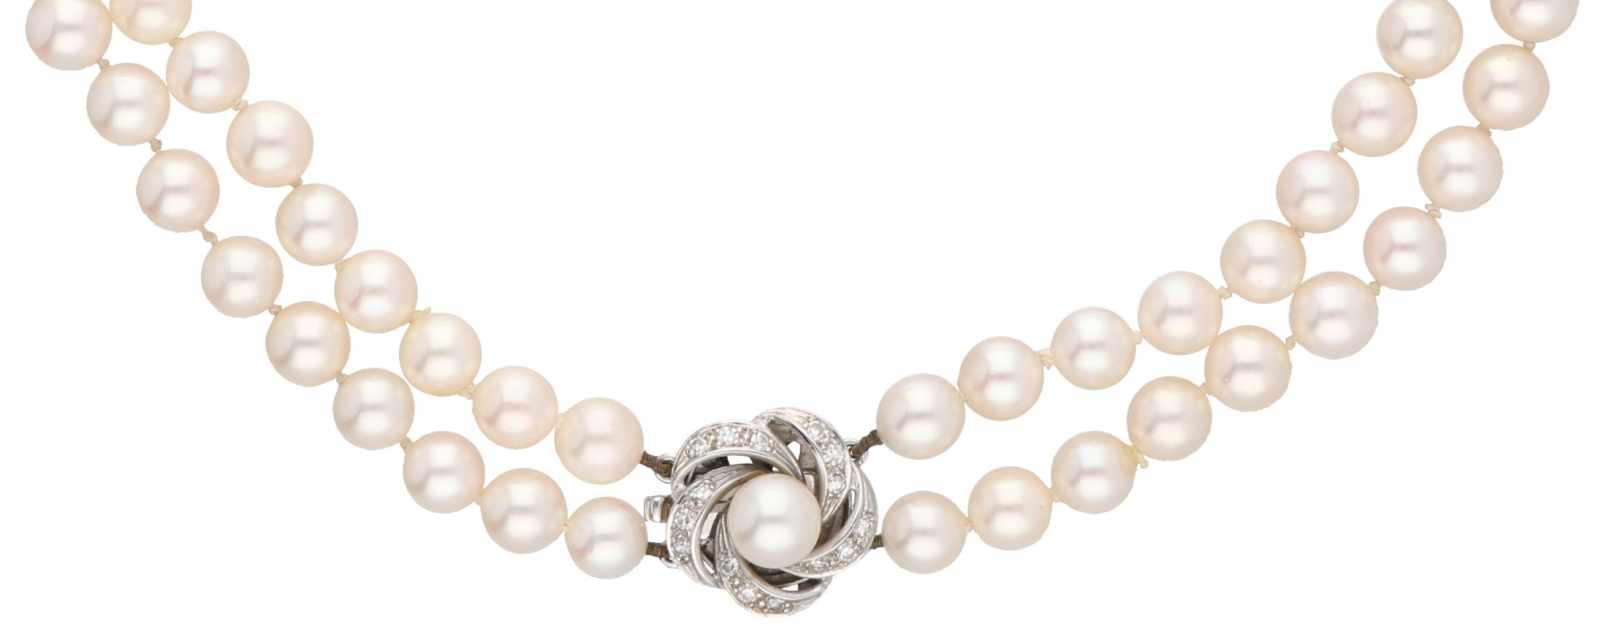 Pearl necklace and with white gold closure, ca. 0.15 carat diamond and cultured pearl - 14 ct.